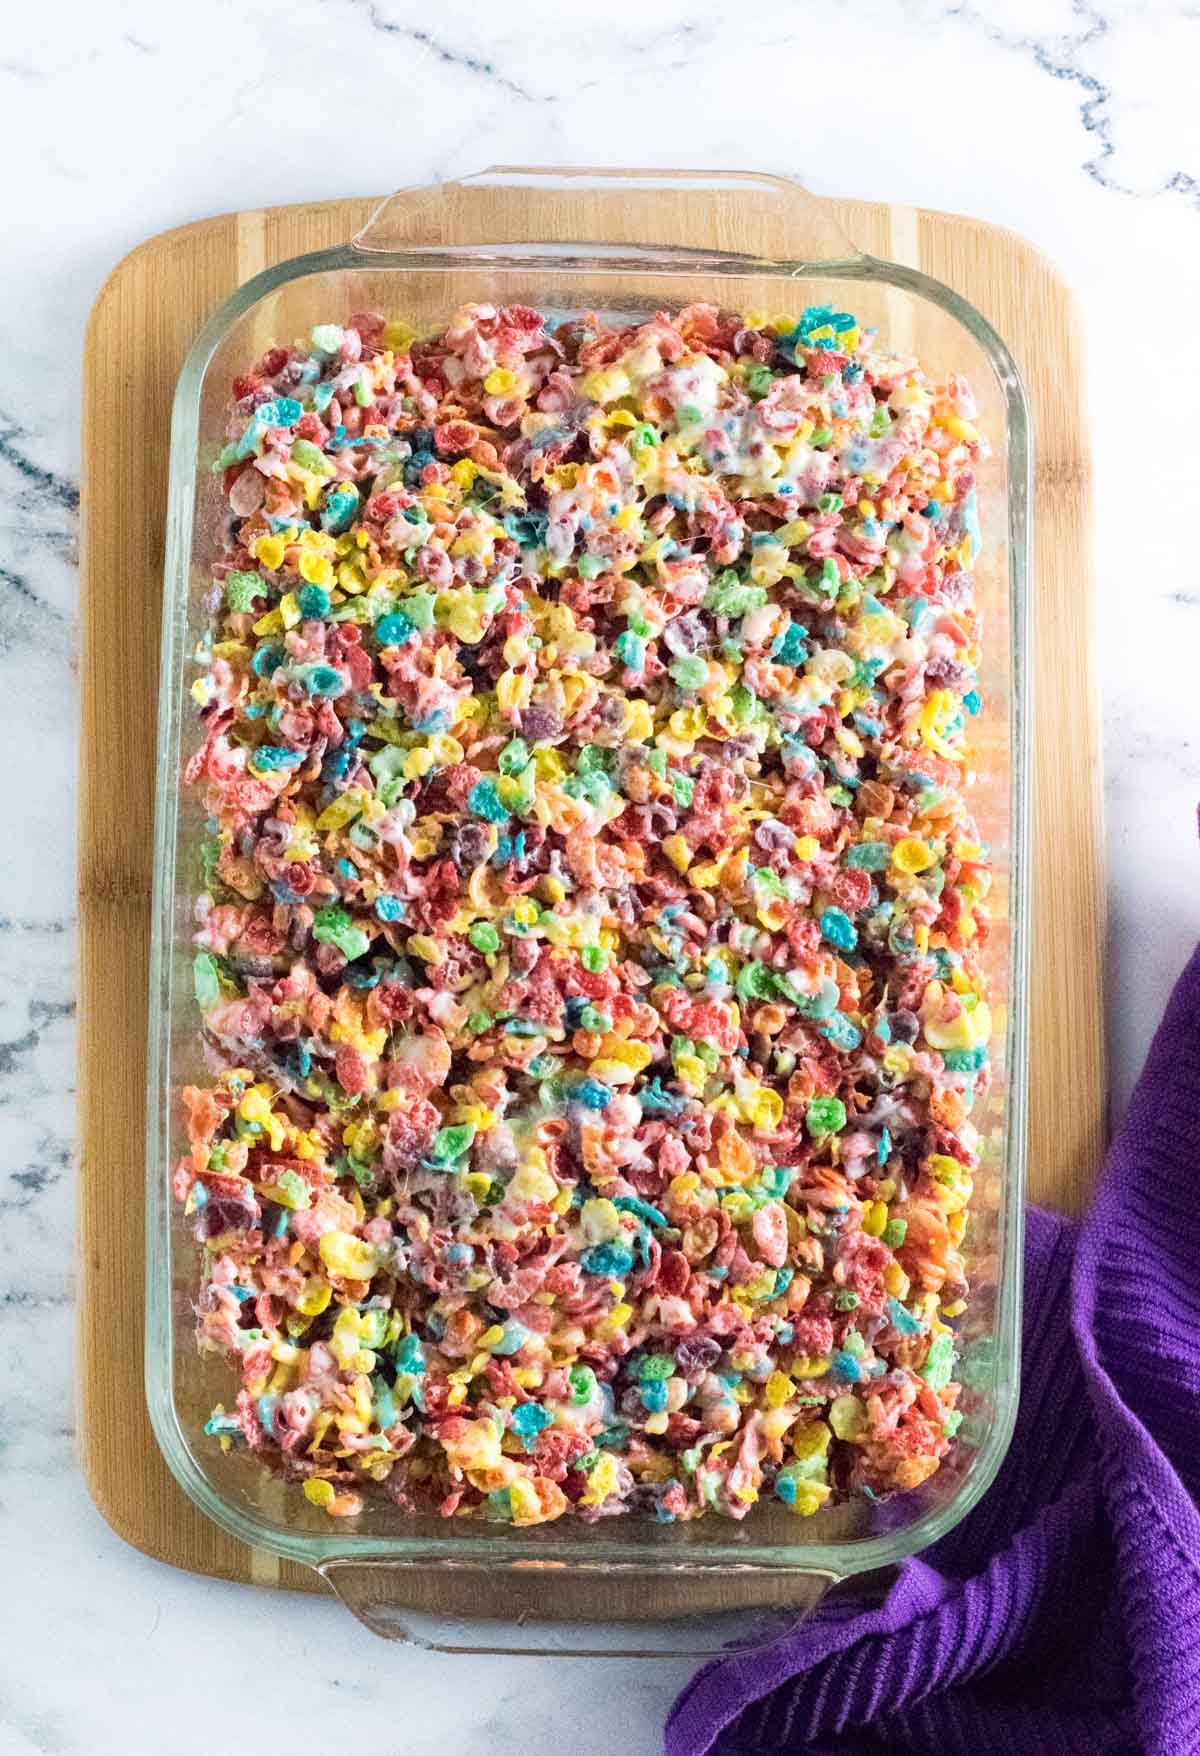 Pressing the cereal treats in a baking dish.